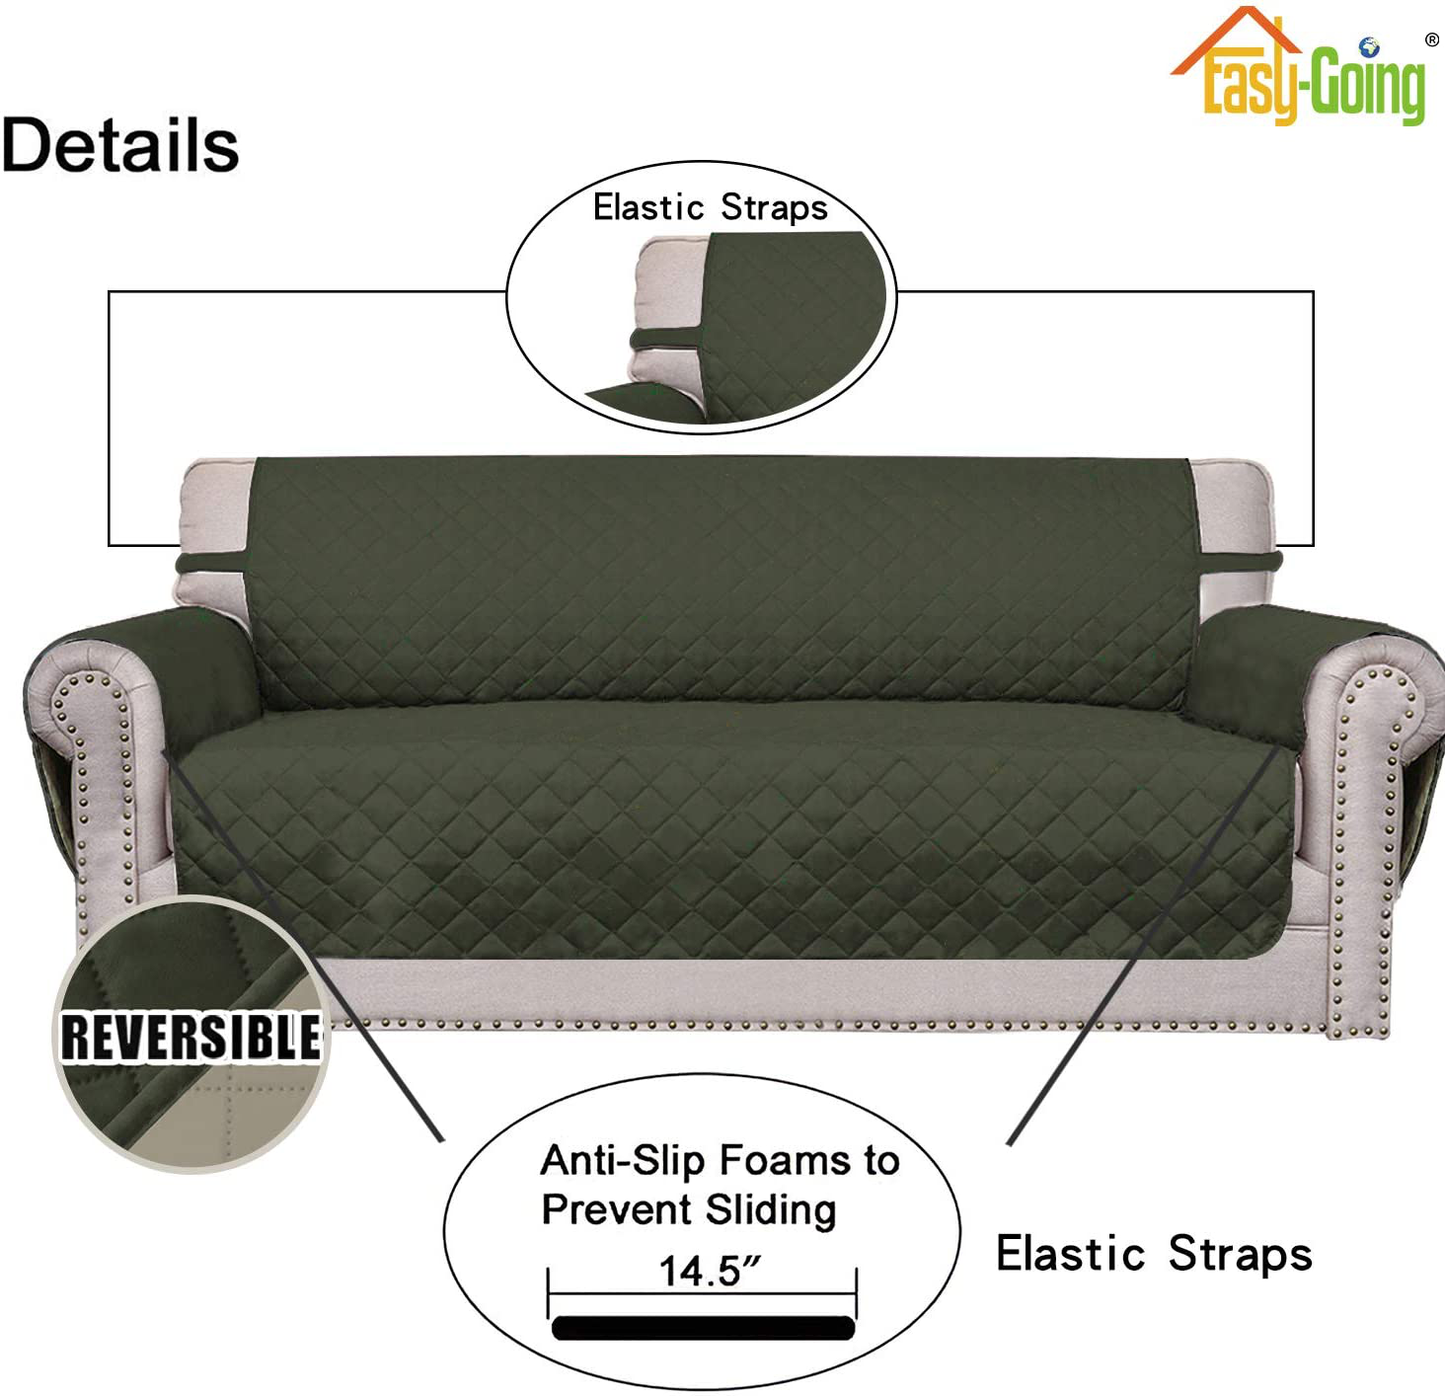 Easy-Going Sofa Slipcover Reversible Sofa Cover Water Resistant Couch Cover Furniture Protector with Elastic Straps for Pets Kids Children Dog Cat(Oversized Sofa, Camel/Ivory)